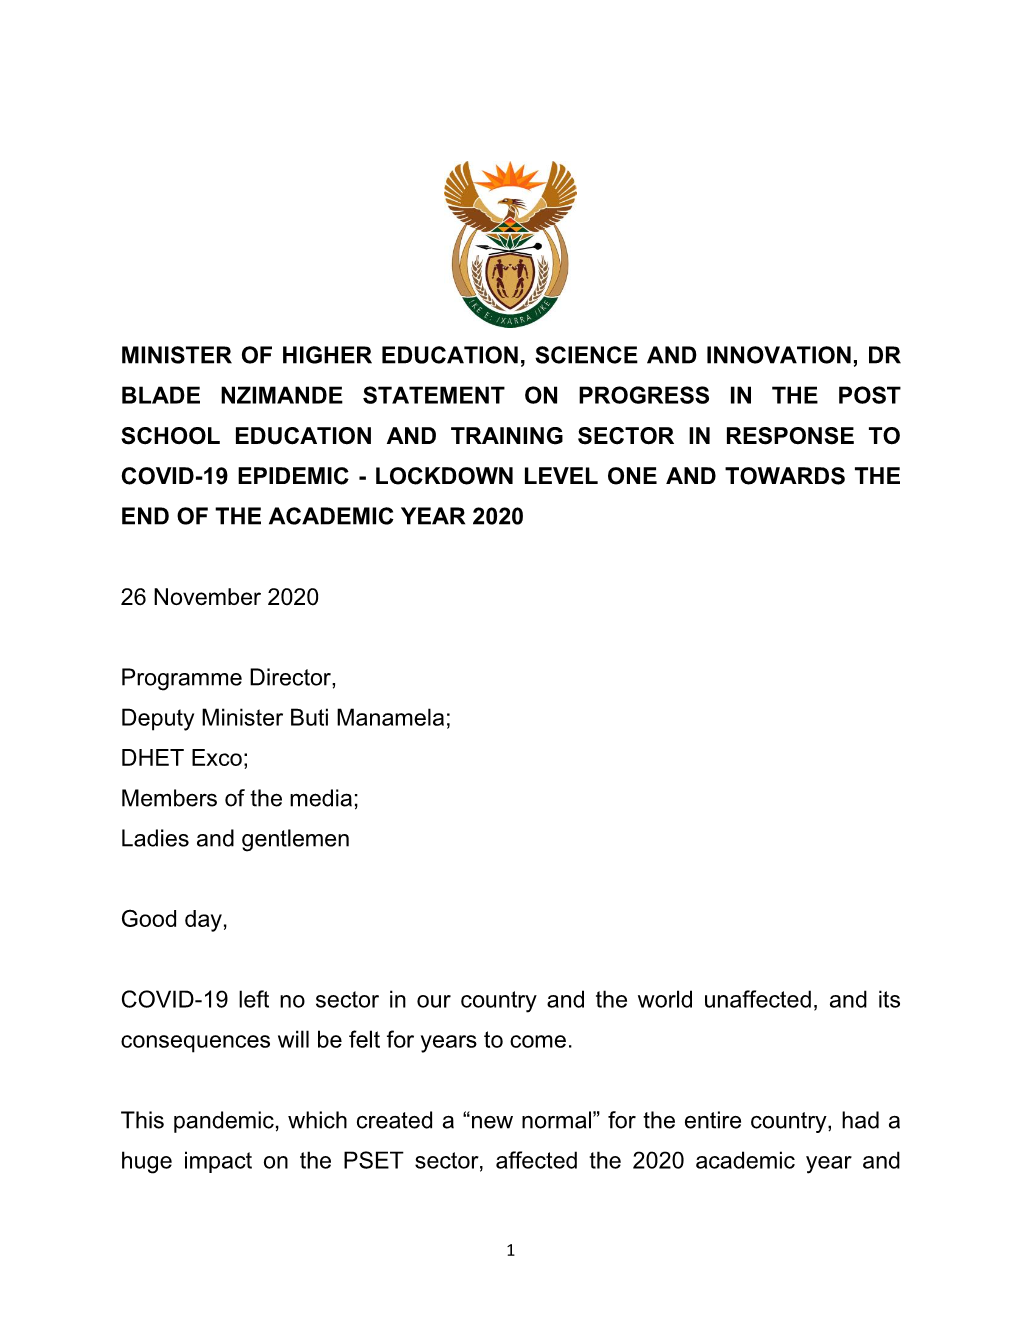 Minister of Higher Education, Science and Innovation, Dr Blade Nzimande Statement on Progress in the Post School Education and T